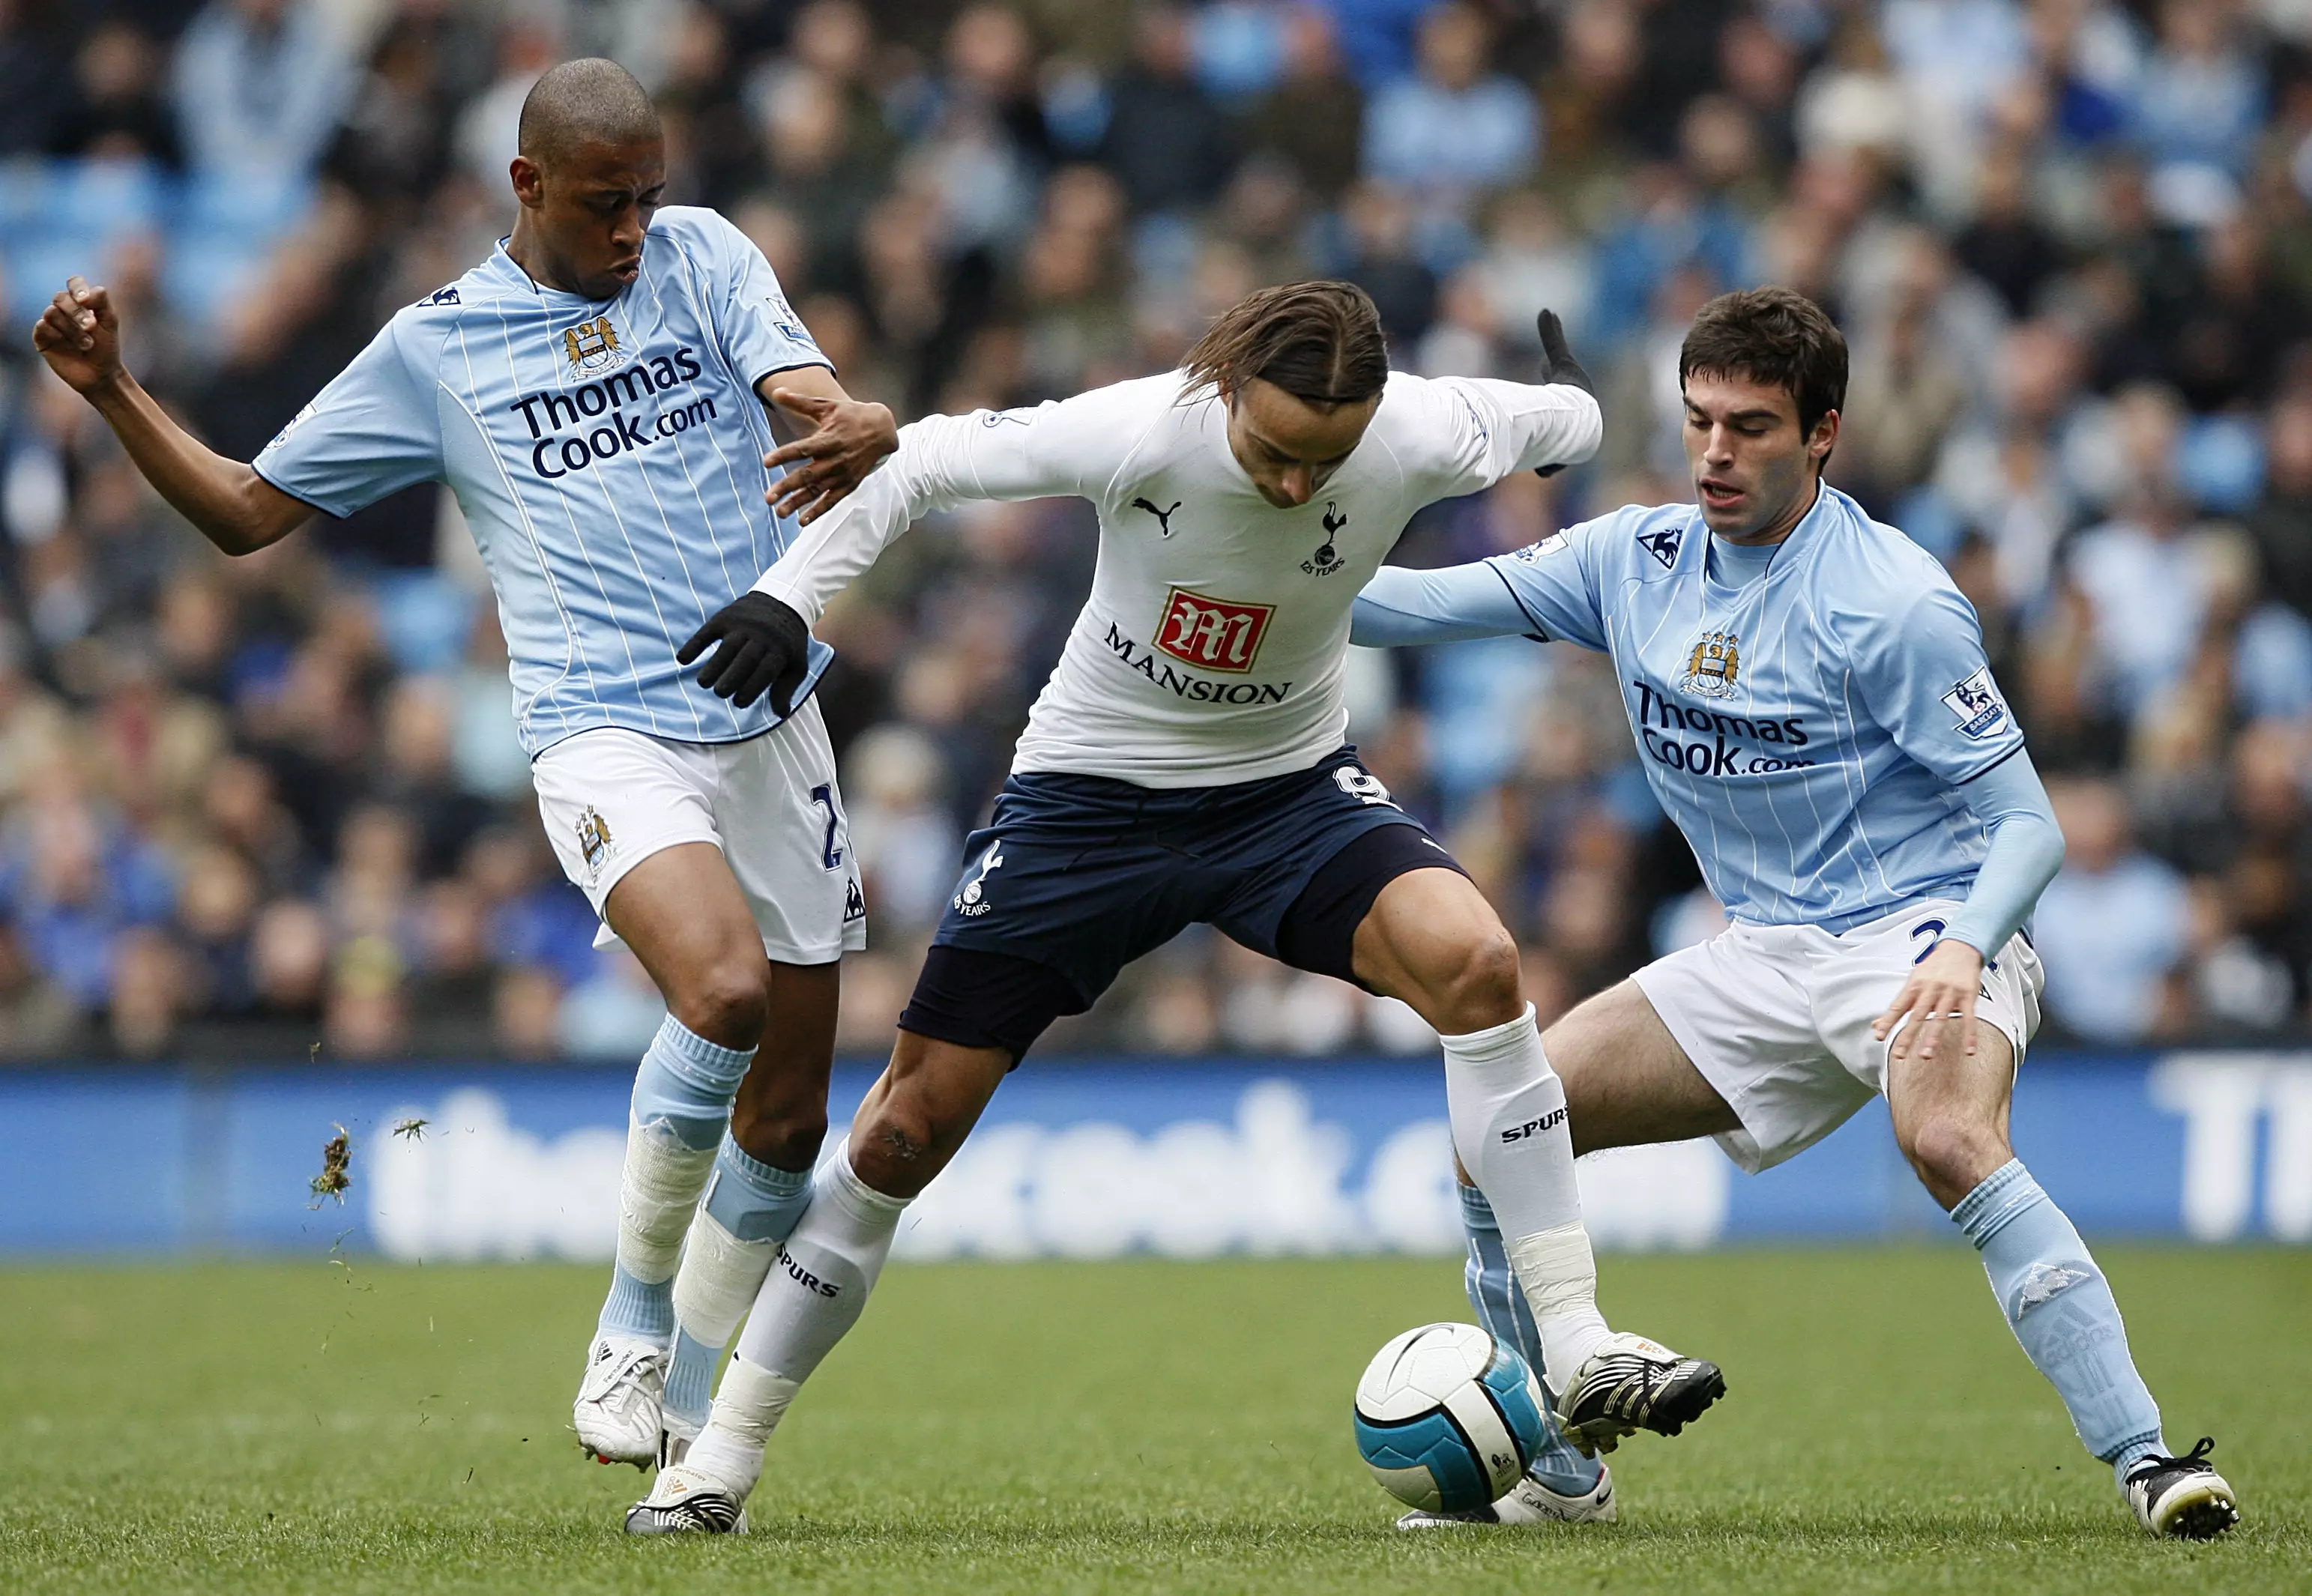 Berbatov in action against City. Image: PA